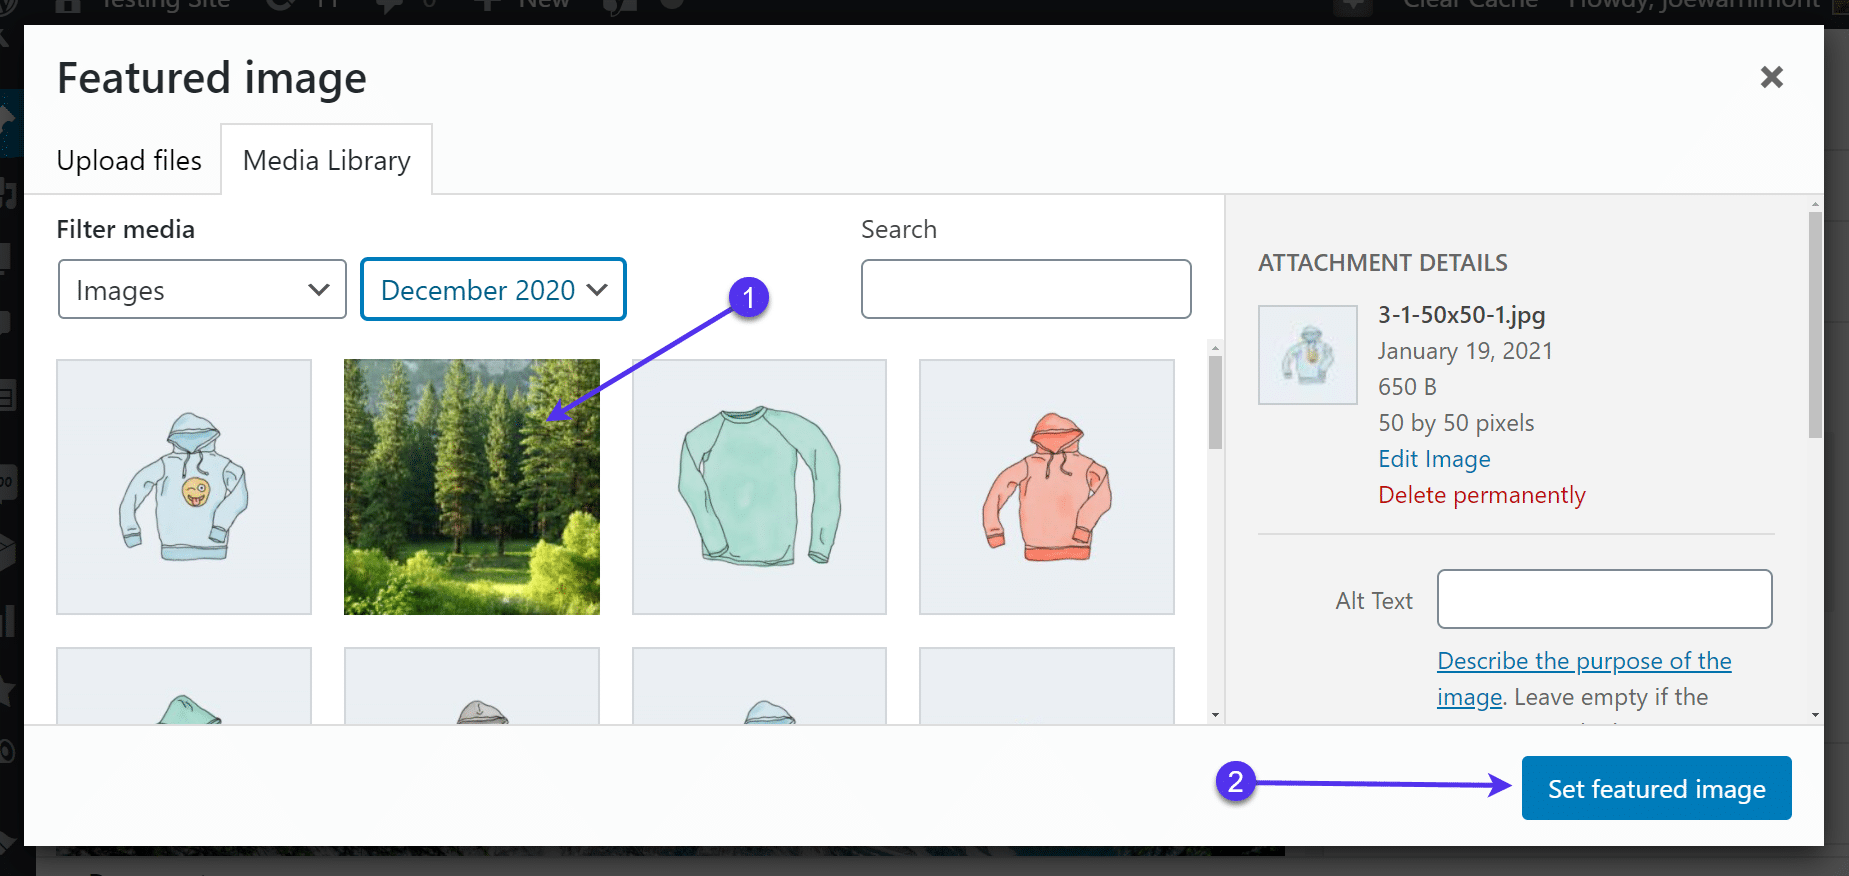 Choose an image to 'Set featured image'